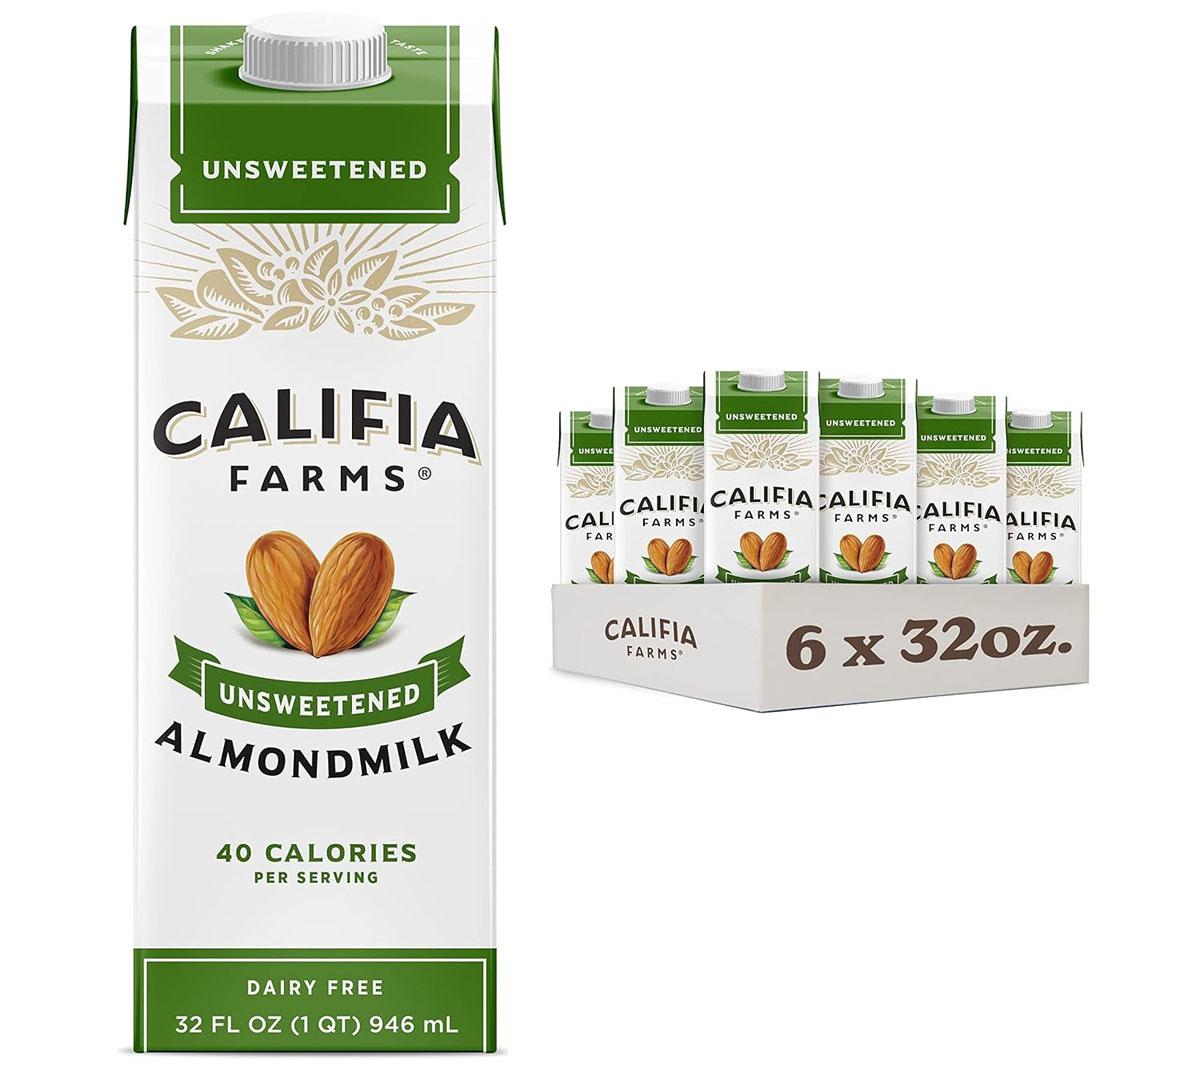 Califia Farms Unsweetened Almond Milk 6 Pack for $13.97